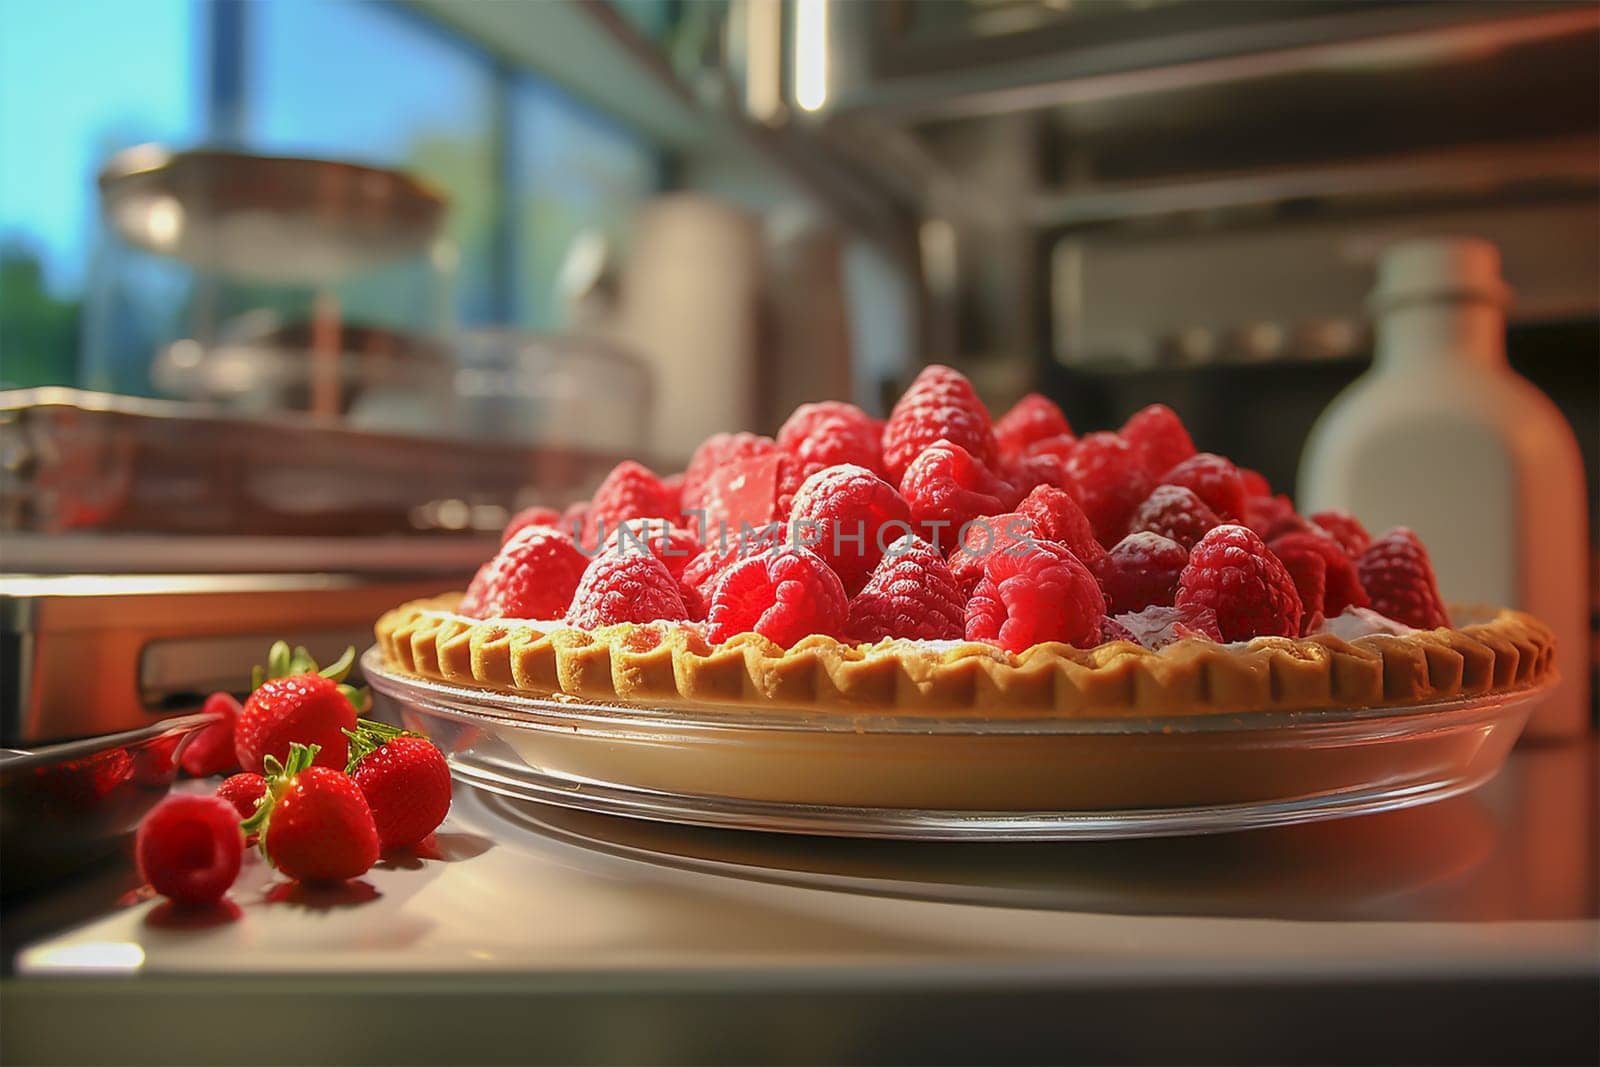 selective focus. Strawberry pie garnished with fresh strawberries. Decorated with berries. birthday cake. rural, rustic table. process of making homemade strawberry pie on a modern kitchen table